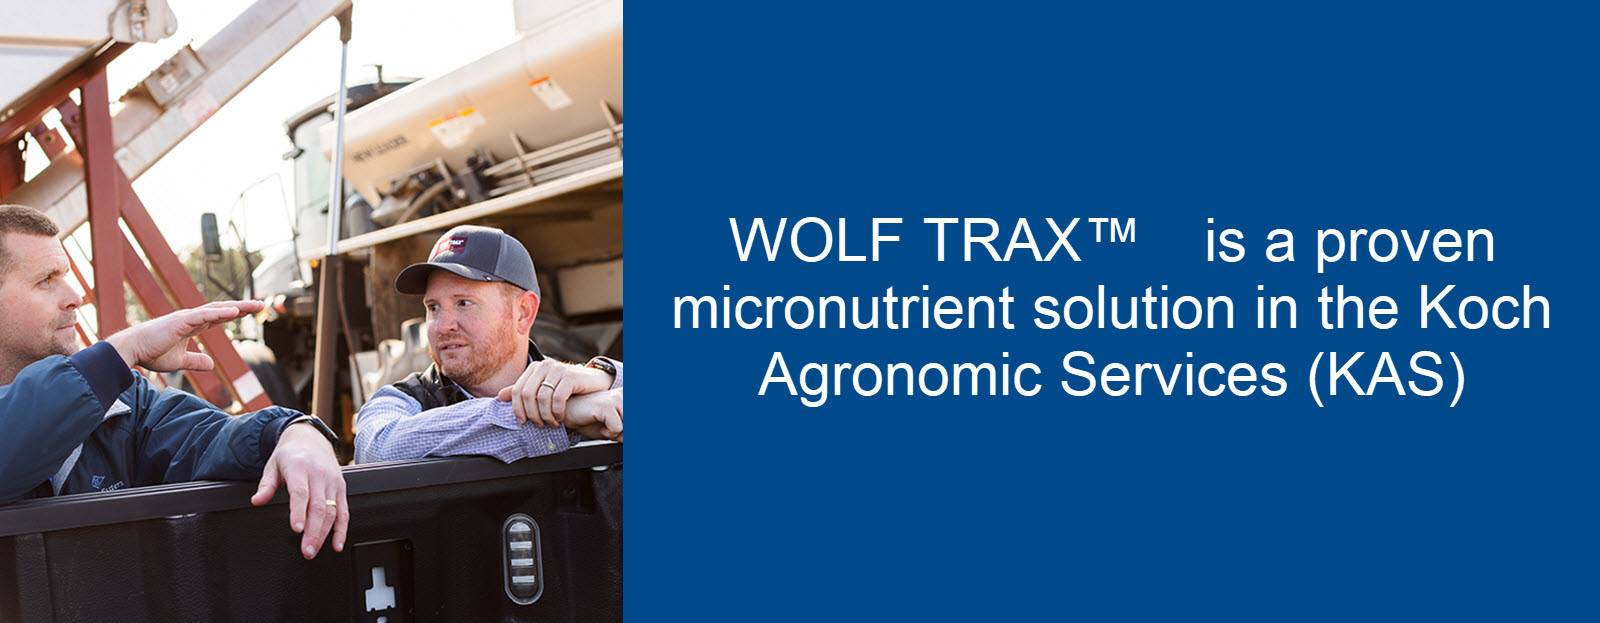 Strategizing a nutrient management plan with WOLF TRAX